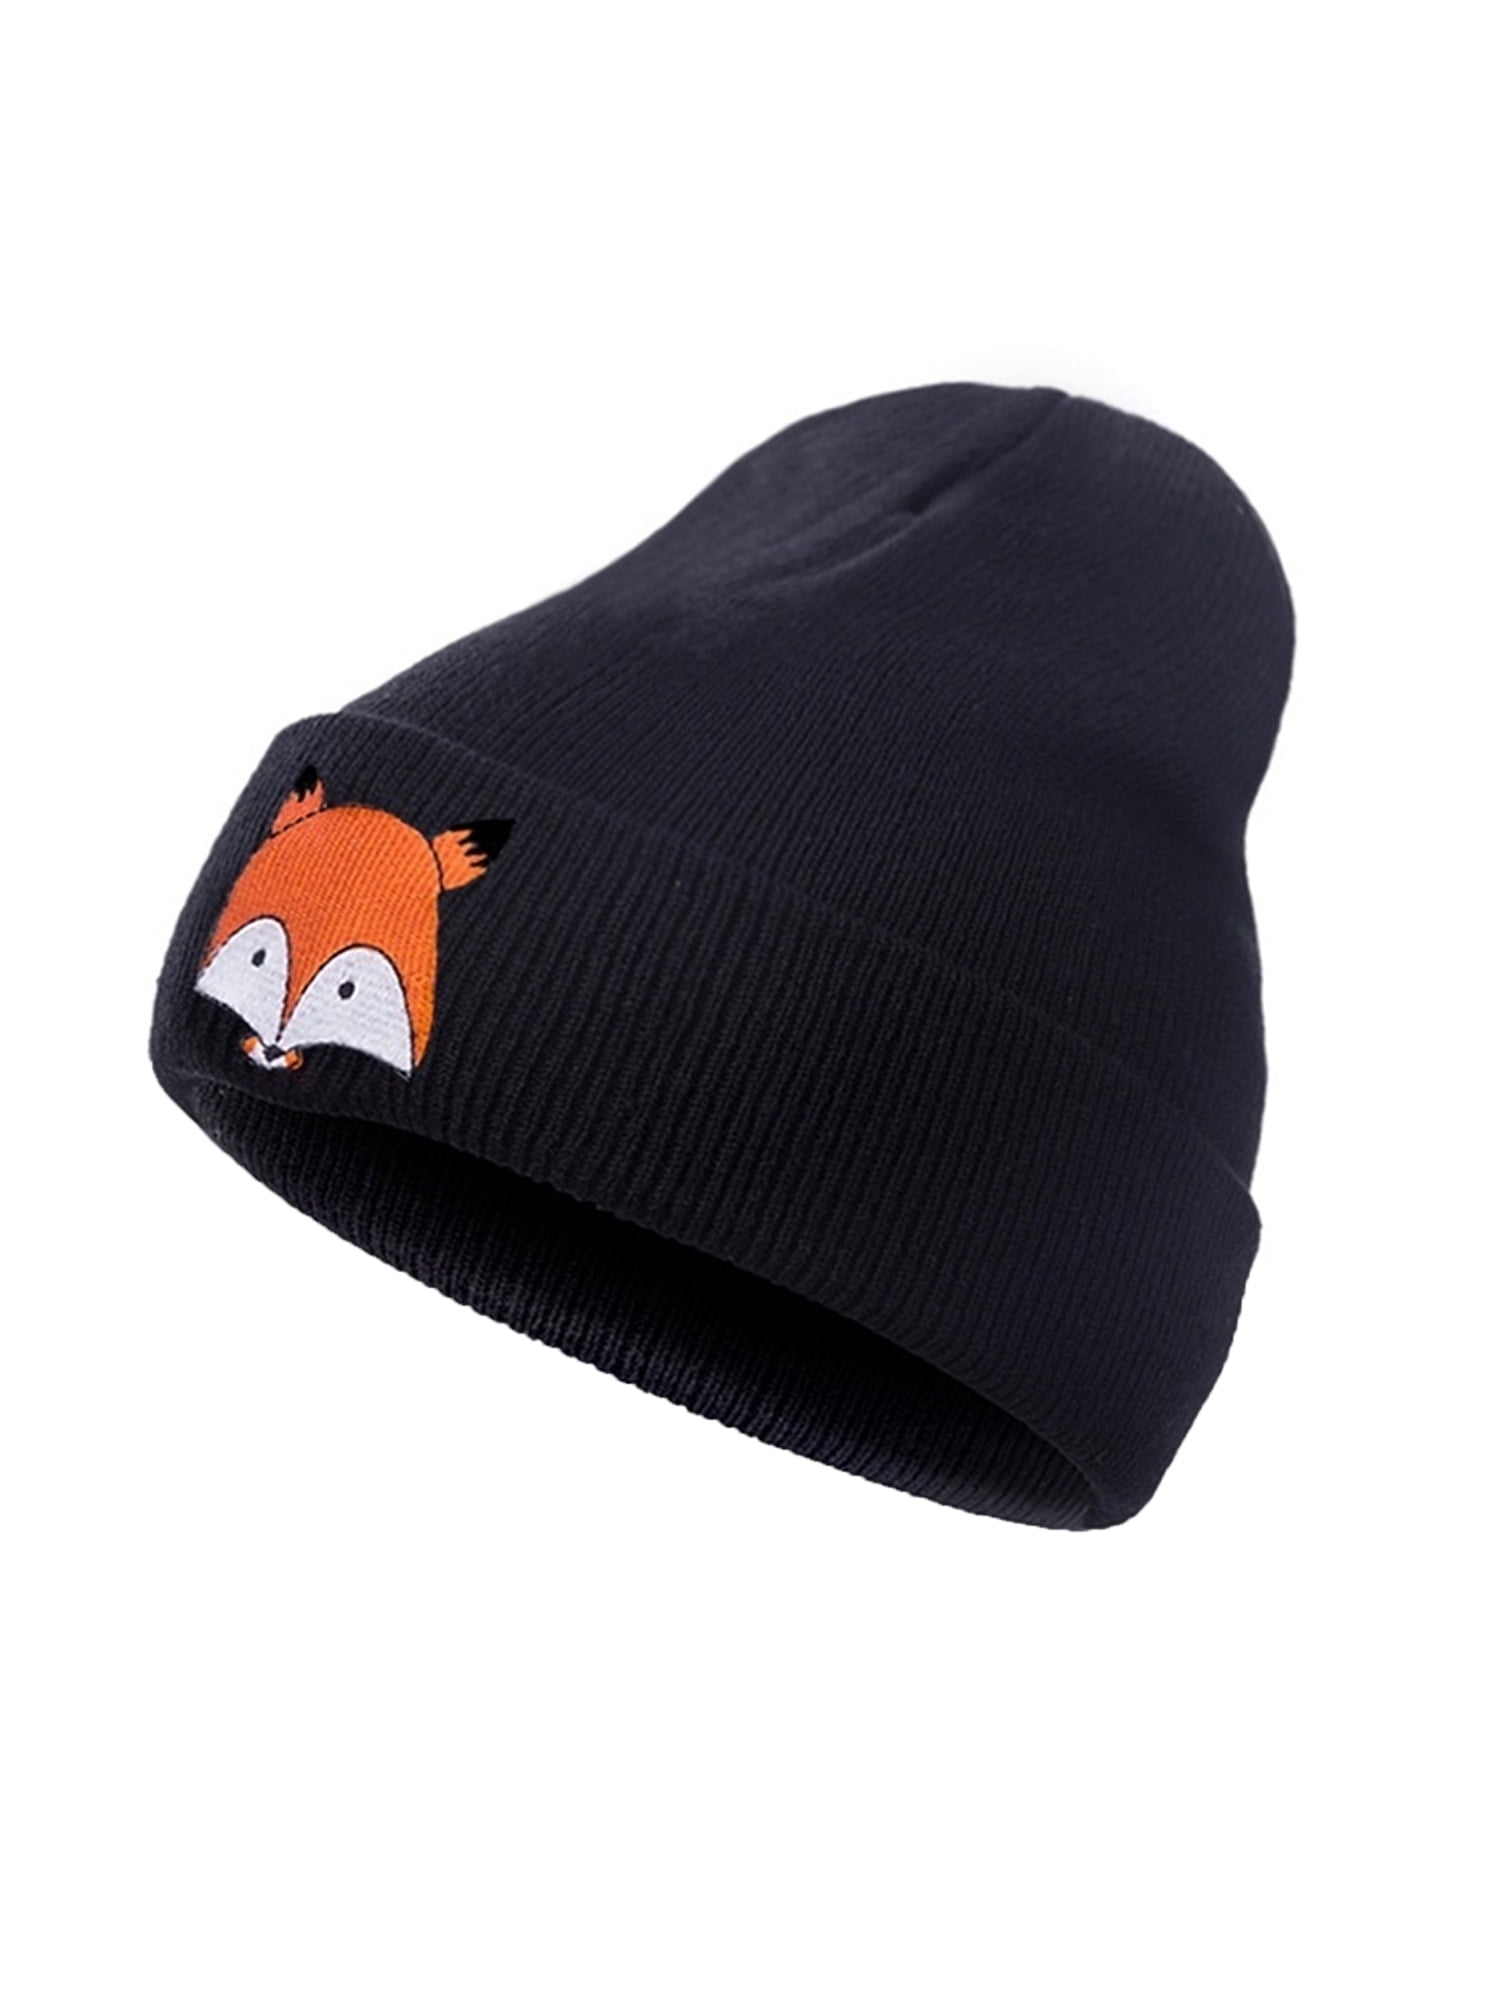 Unisex Embroidery Winter Beanie Cute Fox Printed Warm Chunky Cable Knit Beanie Hats Slouchy Skull Ski Cap